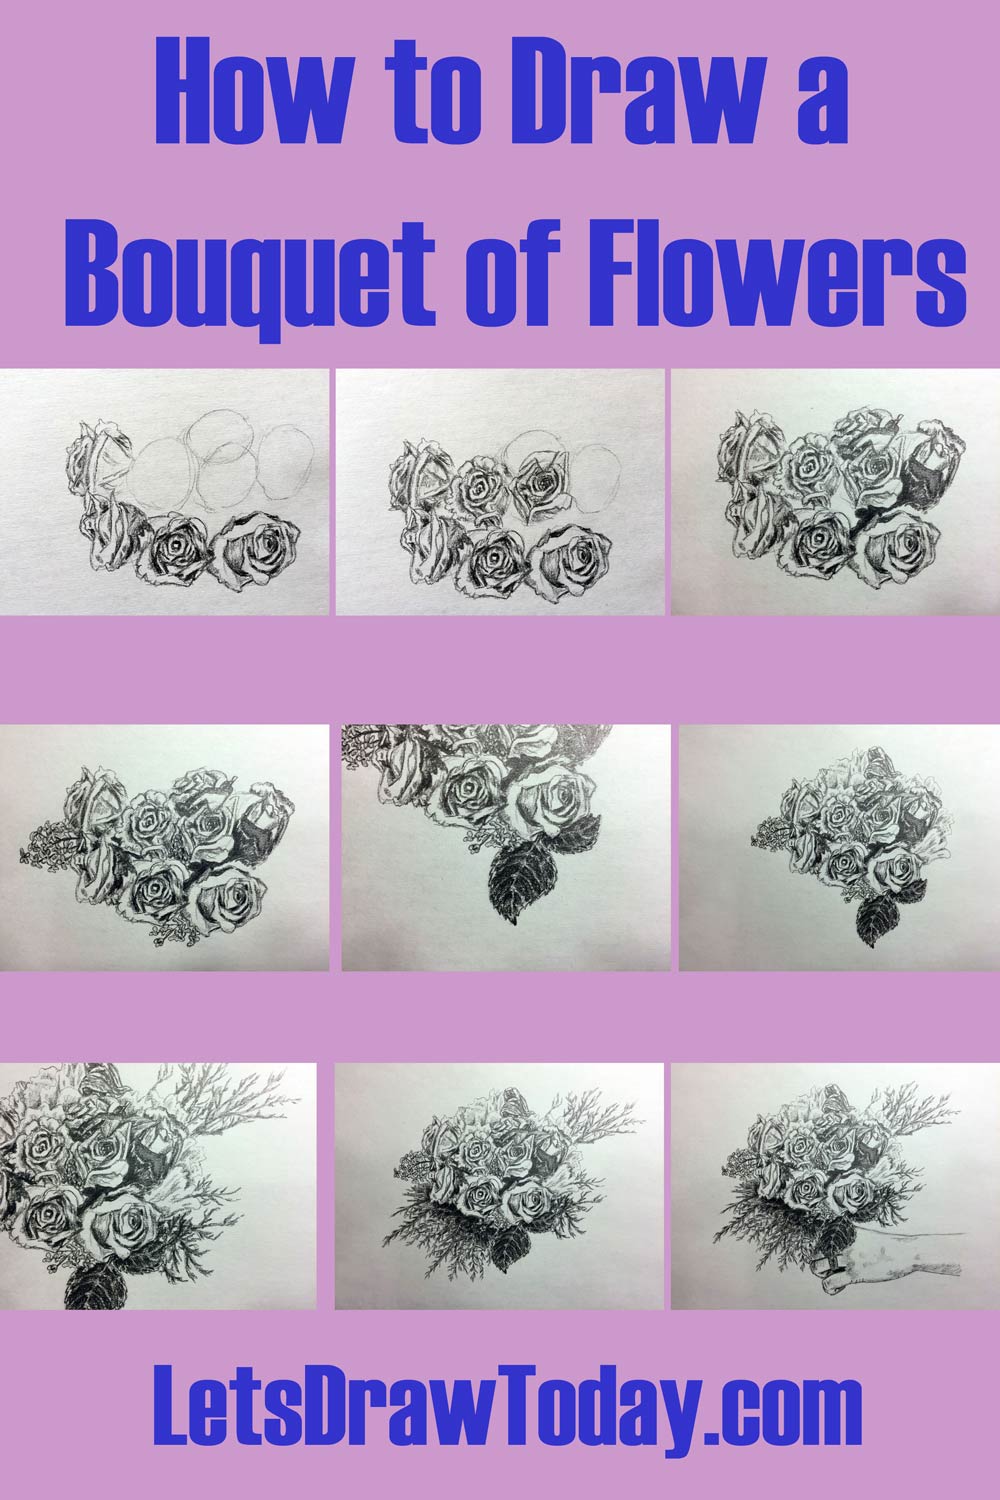 How to Draw a Bouquet of Flowers Let's Draw Today